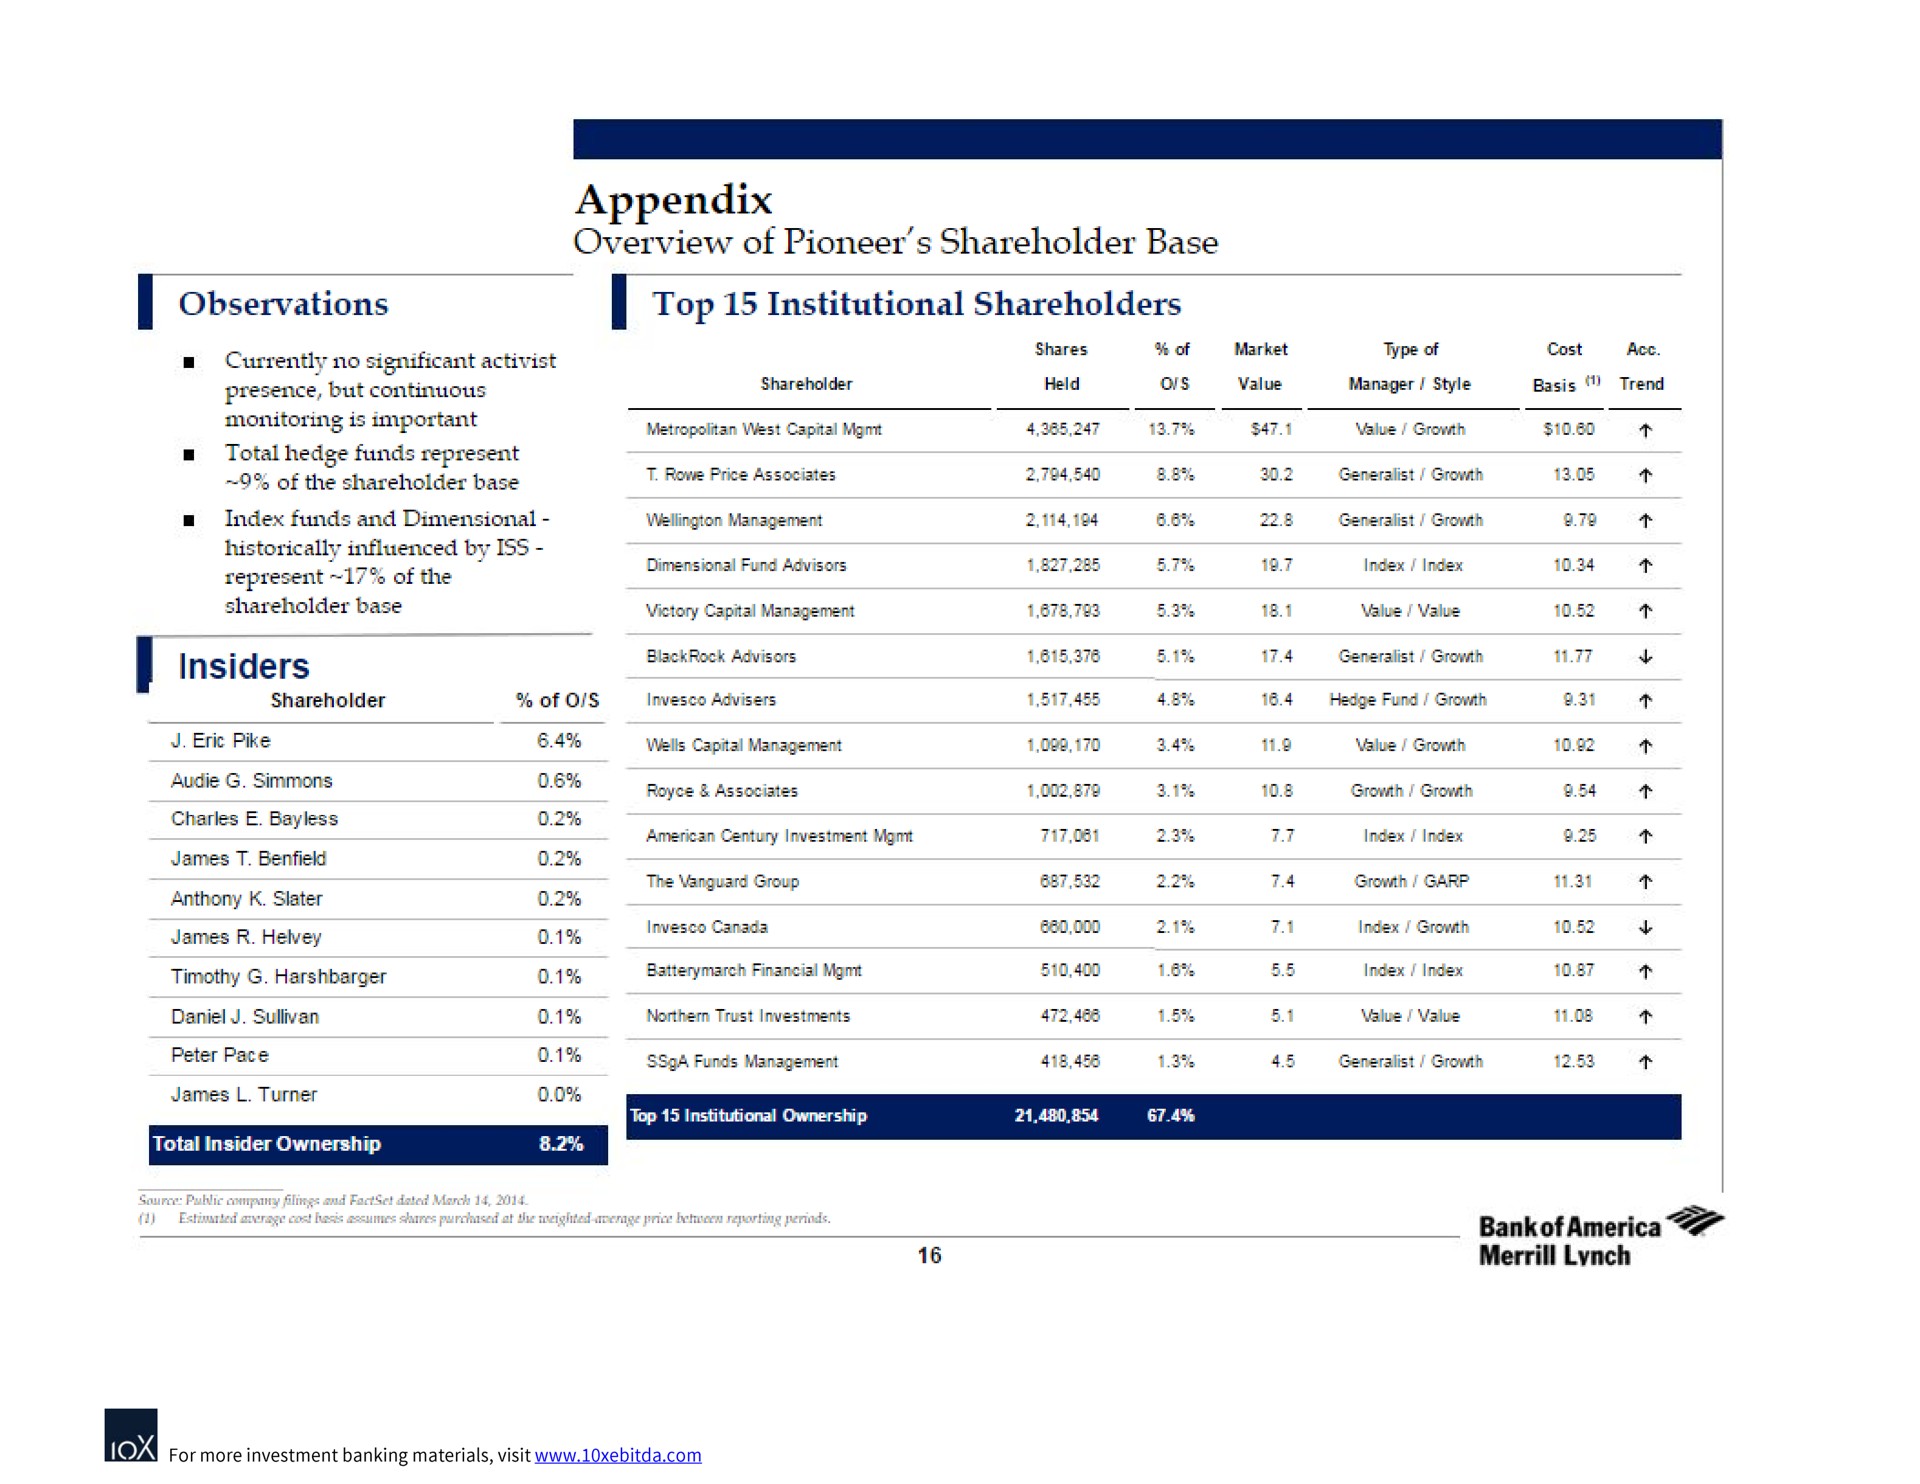 appendix overview of pioneer shareholder base observations top institutional shareholders | Bank of America